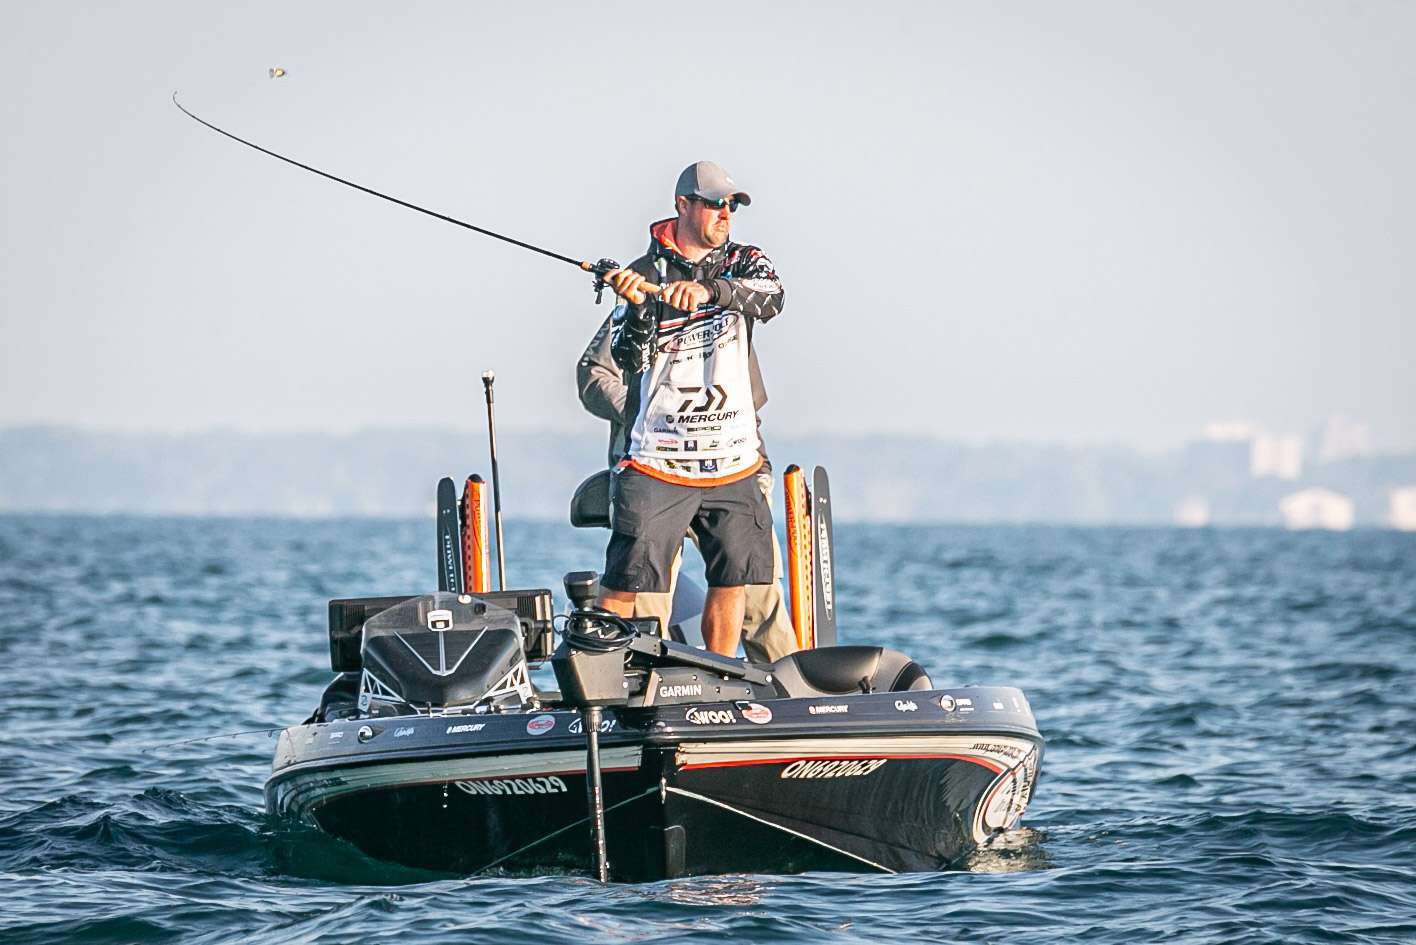 Johnston, who travels the Elite Series with his younger brother Chris, finished third in the Bassmaster Angler of the Year points in 2019 and 16th in 2020. Heâll fish his second Bassmaster Classic in June. Here are his 5 favorite must-haves for his bass rig.